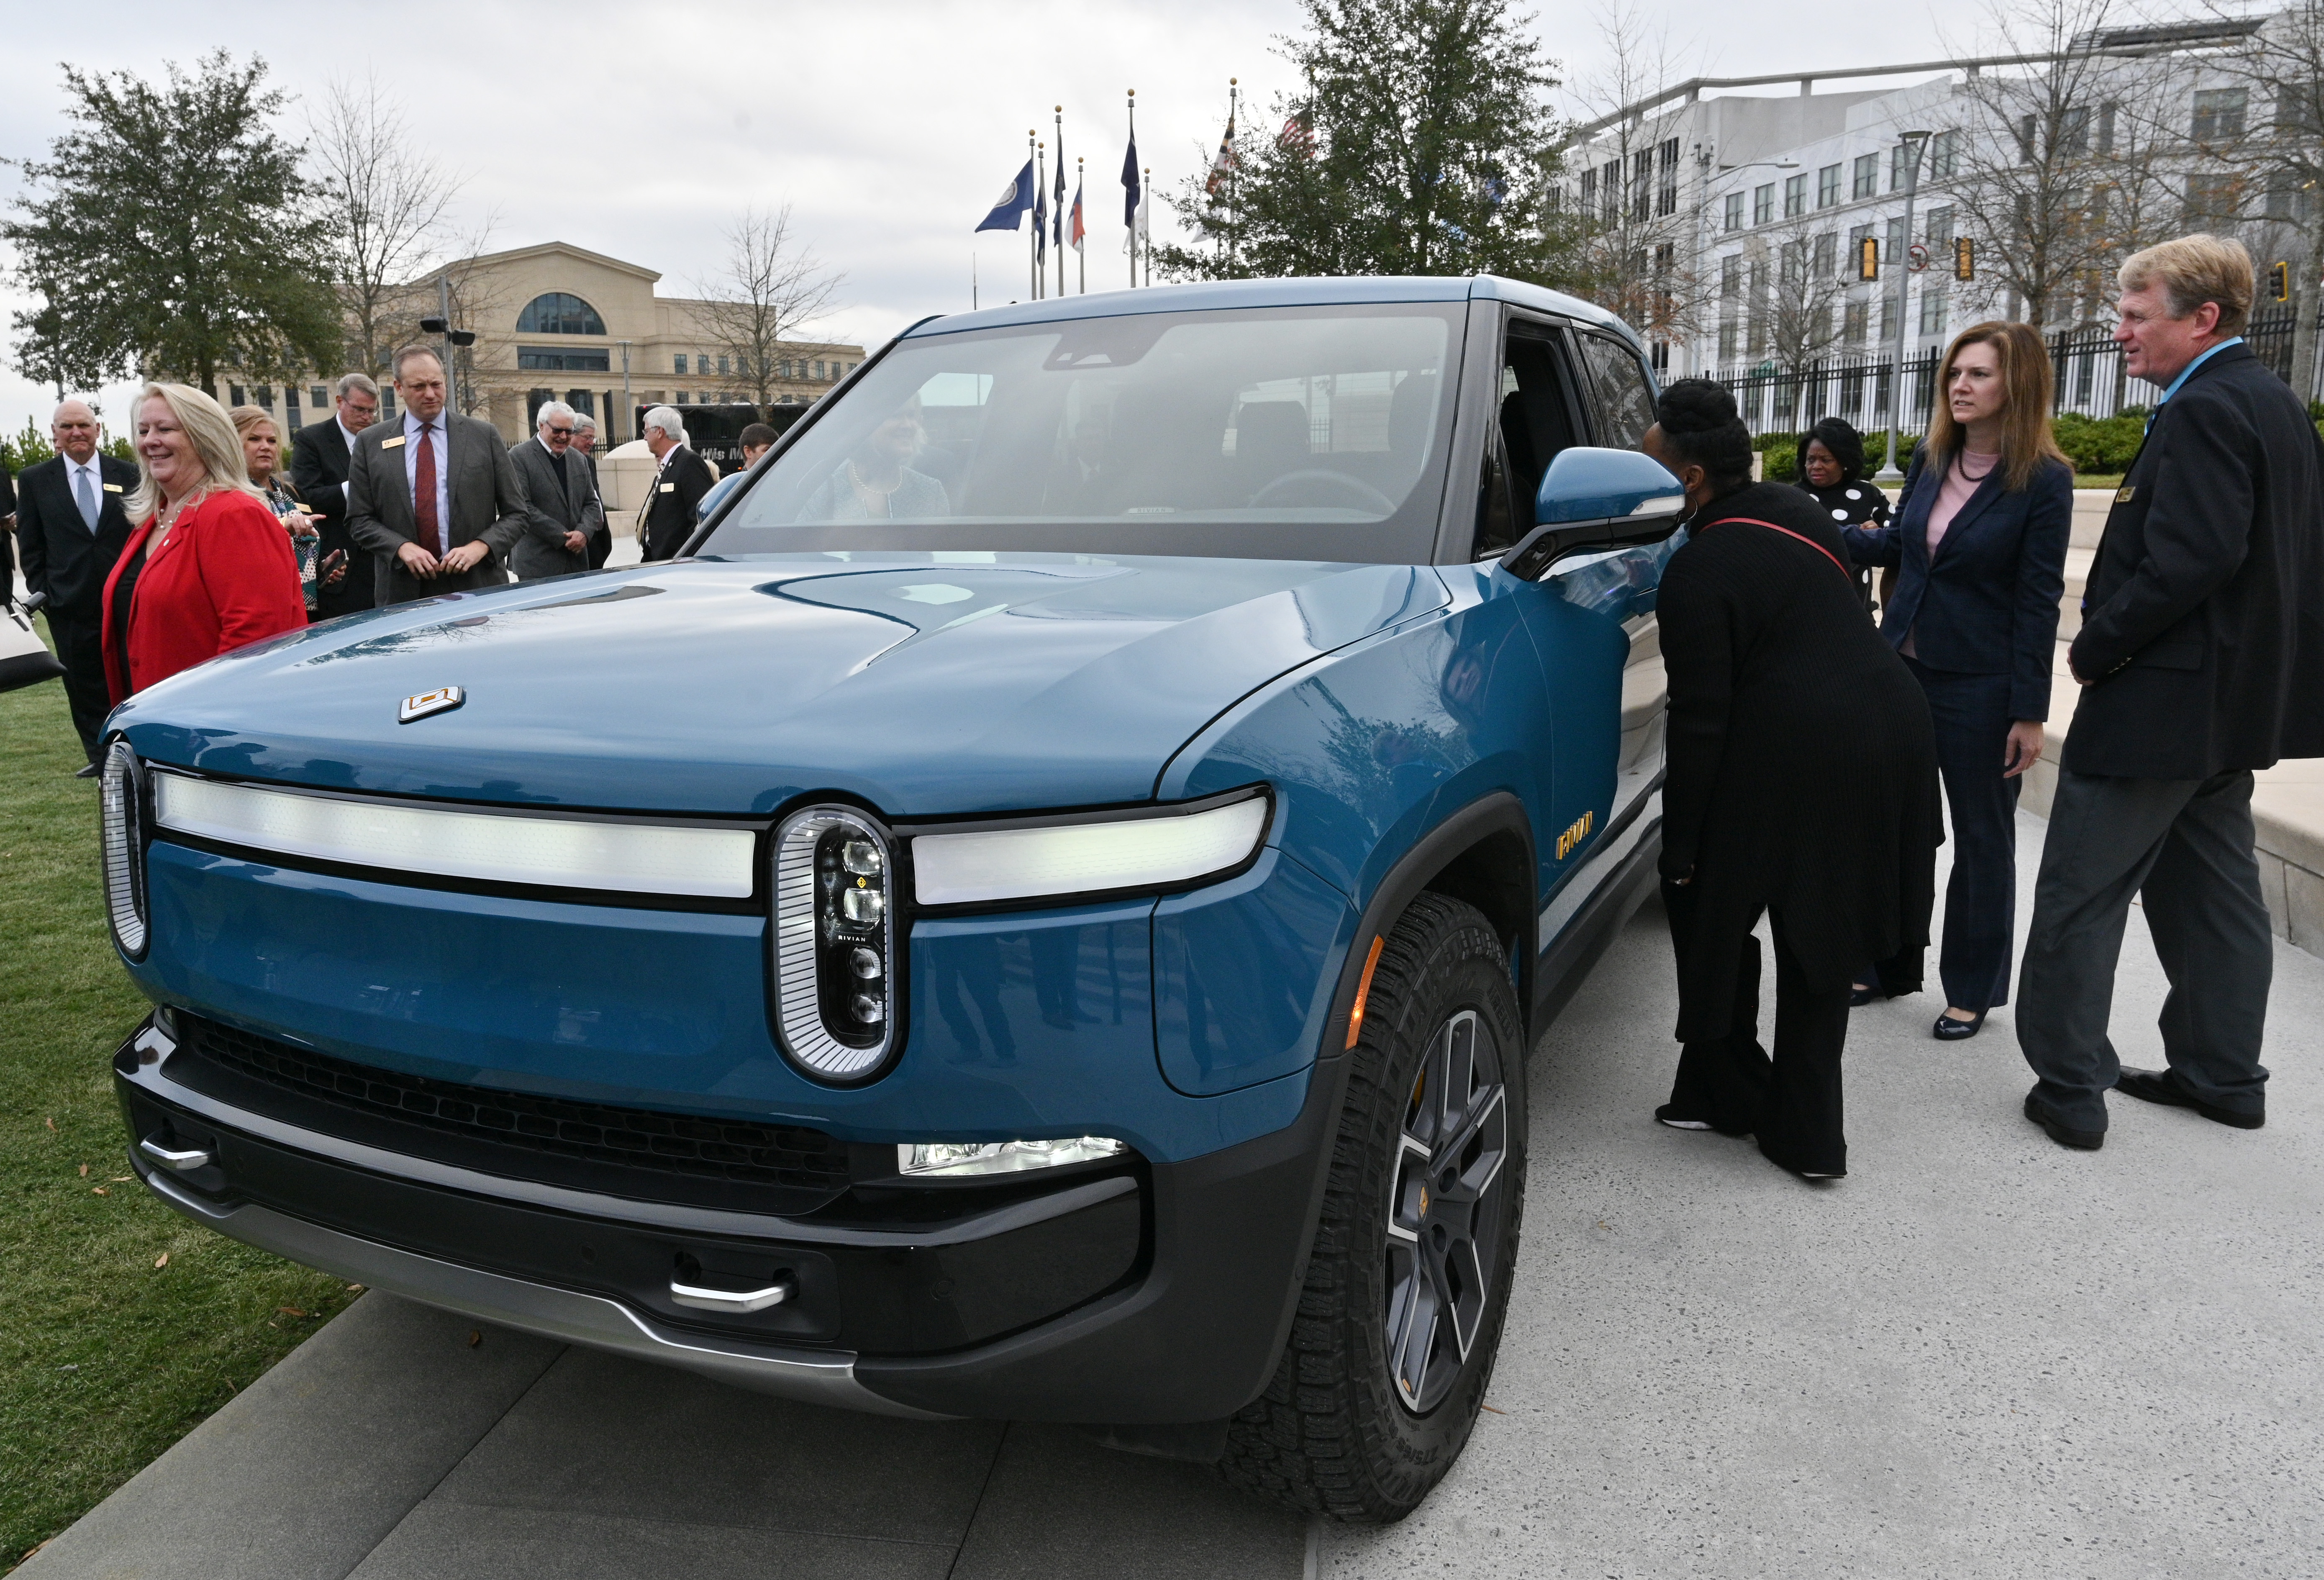 Guests look at Rivian's R1T electric truck during a press conference at Liberty Plaza across from the Georgia State Capitol in Atlanta on Thursday, December 16, 2021. Electric vehicle maker Rivian confirmed its plans to build a $5 billion assembly plant and battery factory in Georgia, which Gov. Brian Kemp called "the largest single economic development project ever in this state's history." (Hyosub Shin / Hyosub.Shin@ajc.com)